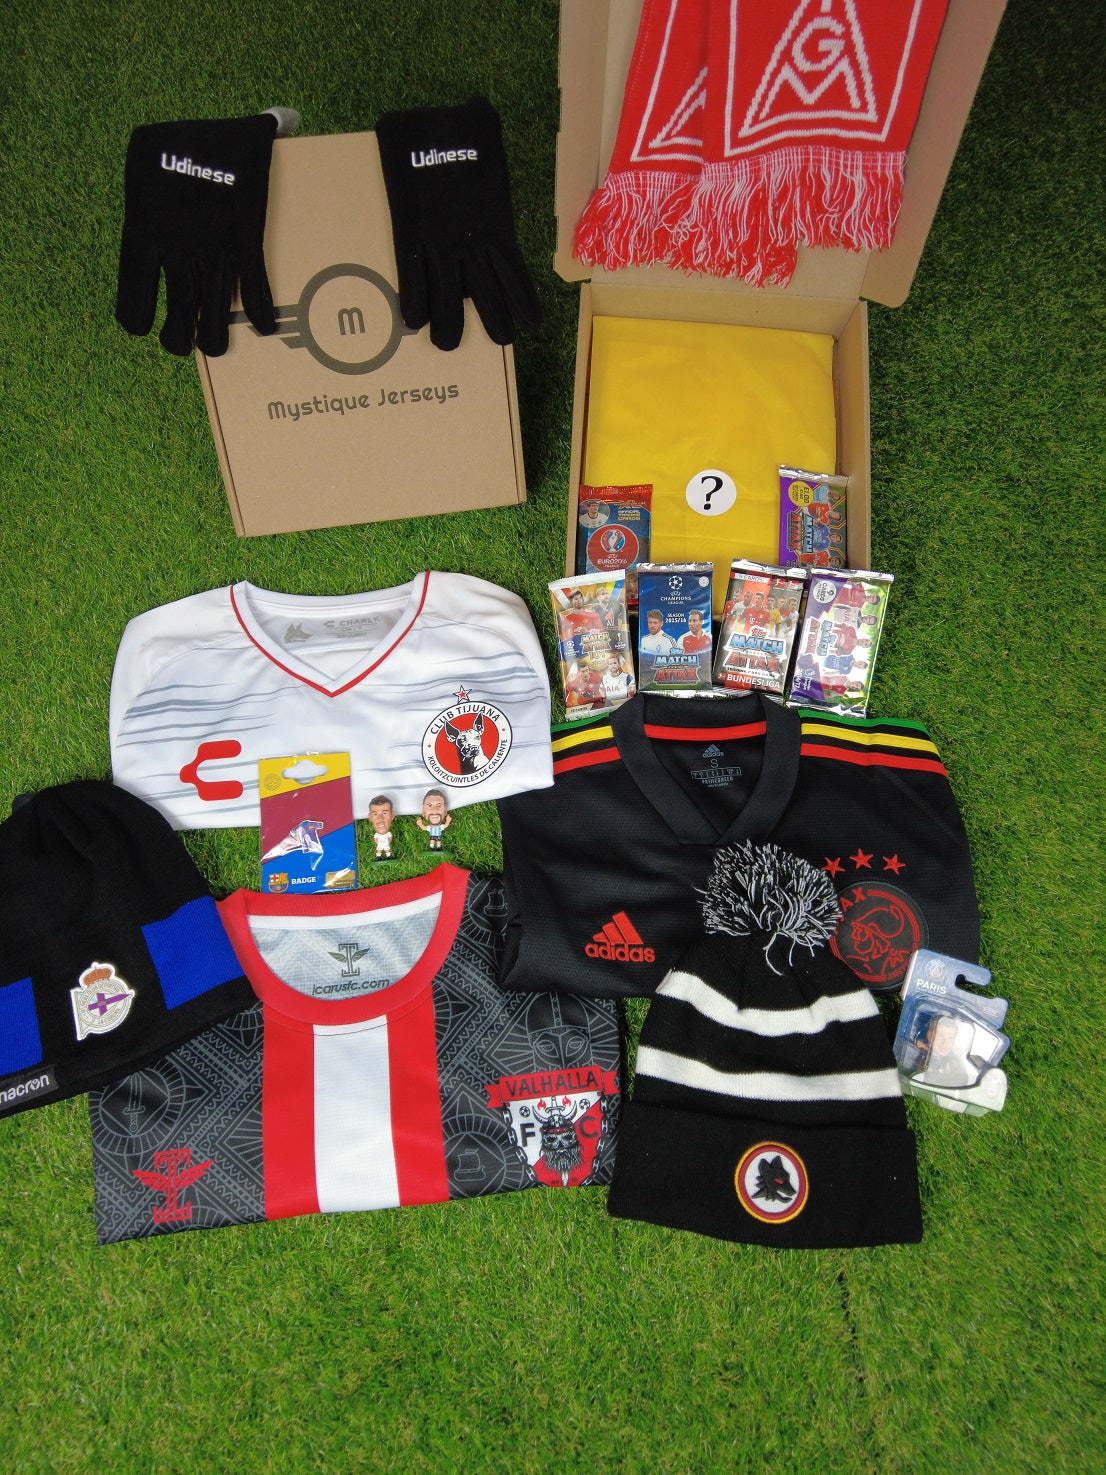 Premium Mystery Football Shirt Box: Genuine Mystery Jersey (Adult - Men), scarf, mini-figure, Mystery Cards, and one other collectible. Random selection from various teams worldwide. Includes retro, special edition, and training jerseys. 100% genuine.